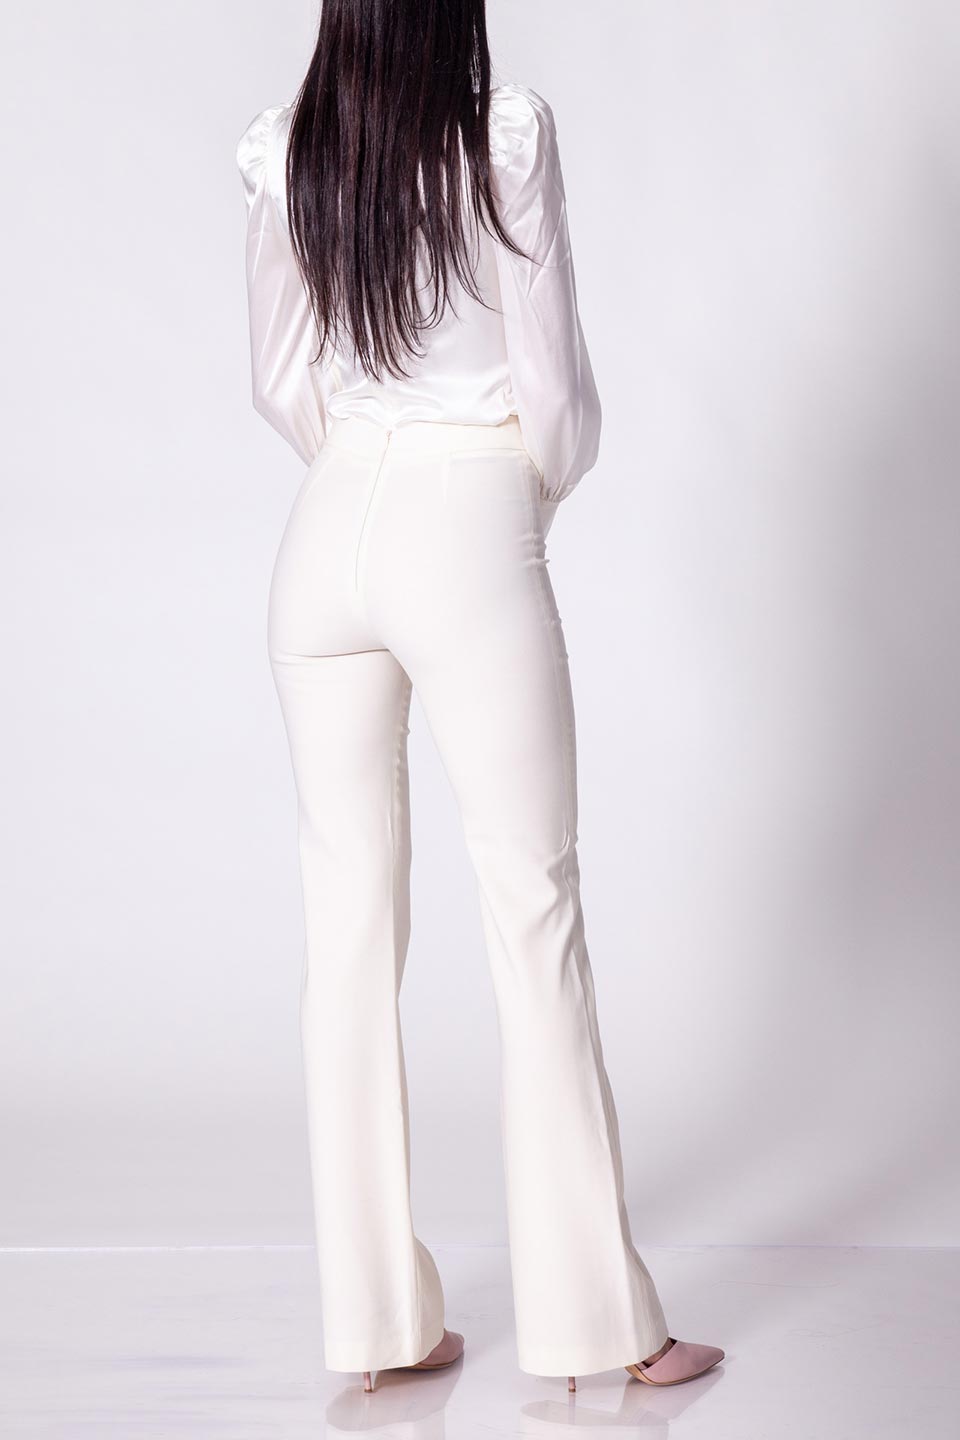 Thumbnail for Product gallery 2, Matisse Trousers